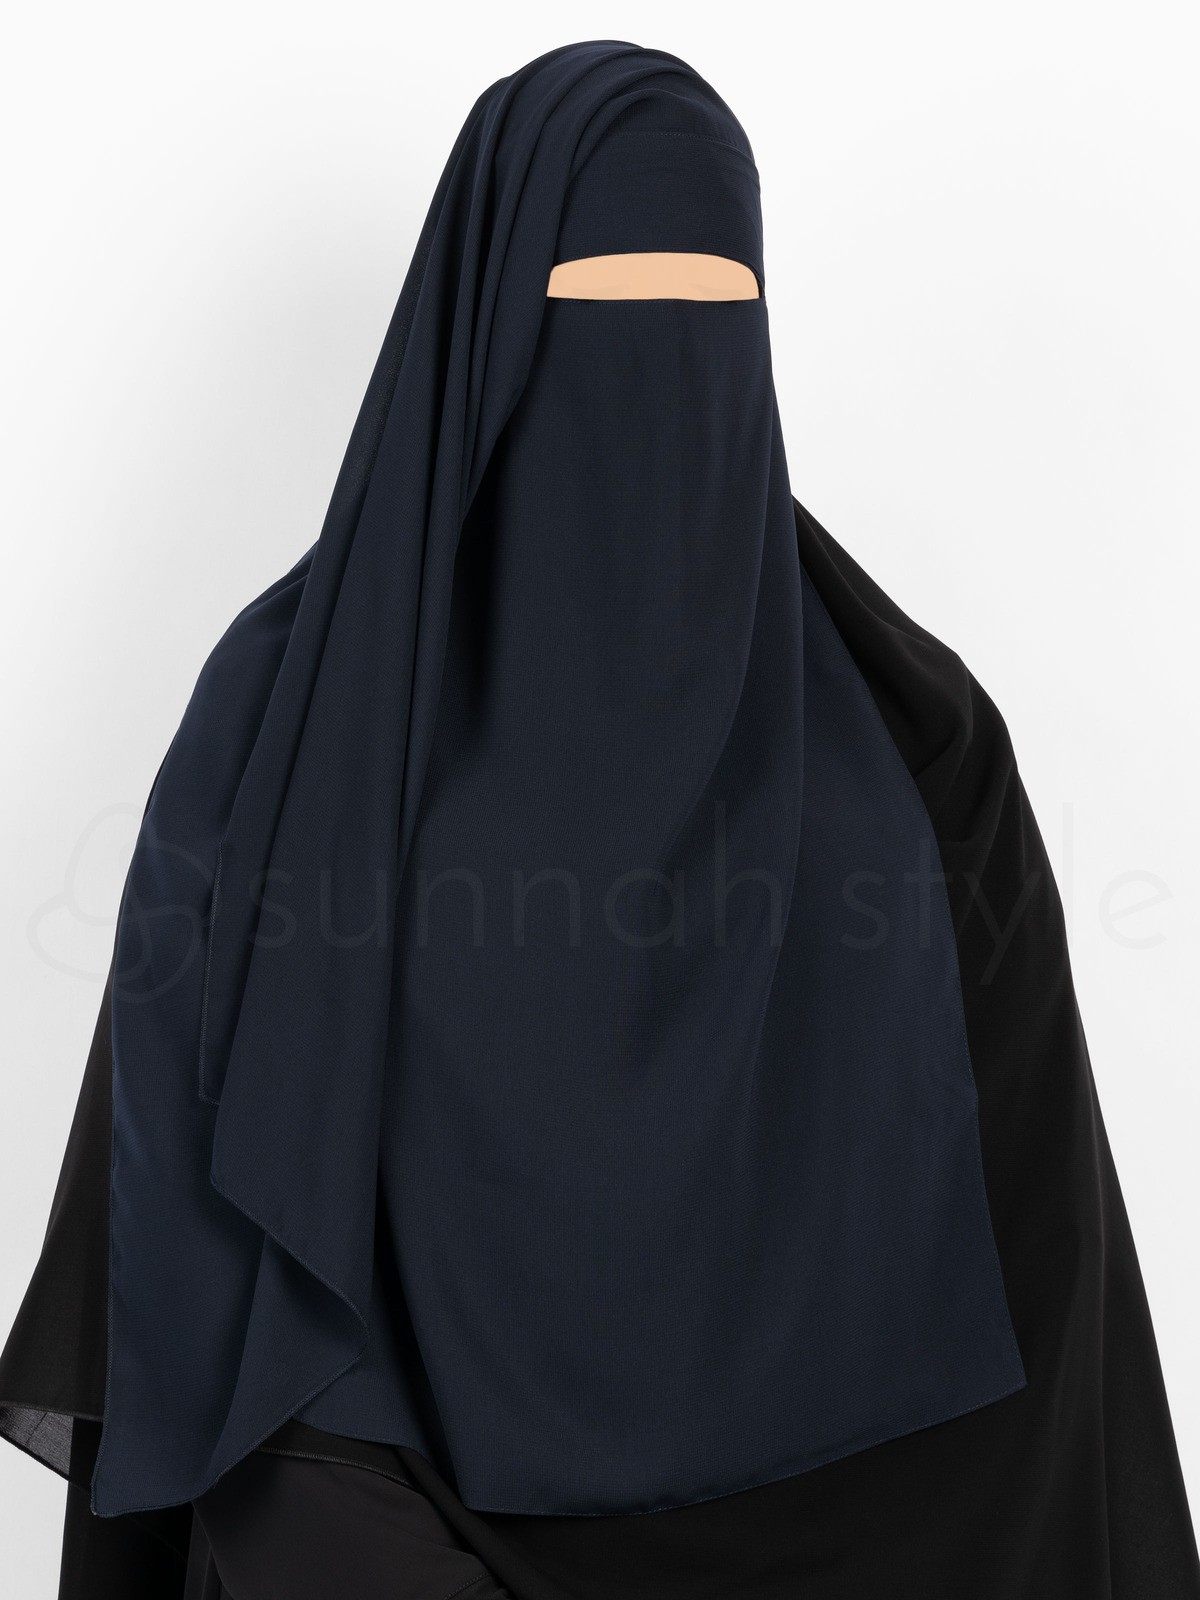 Sunnah Style - Long Two Layer Niqab (Navy Blue)